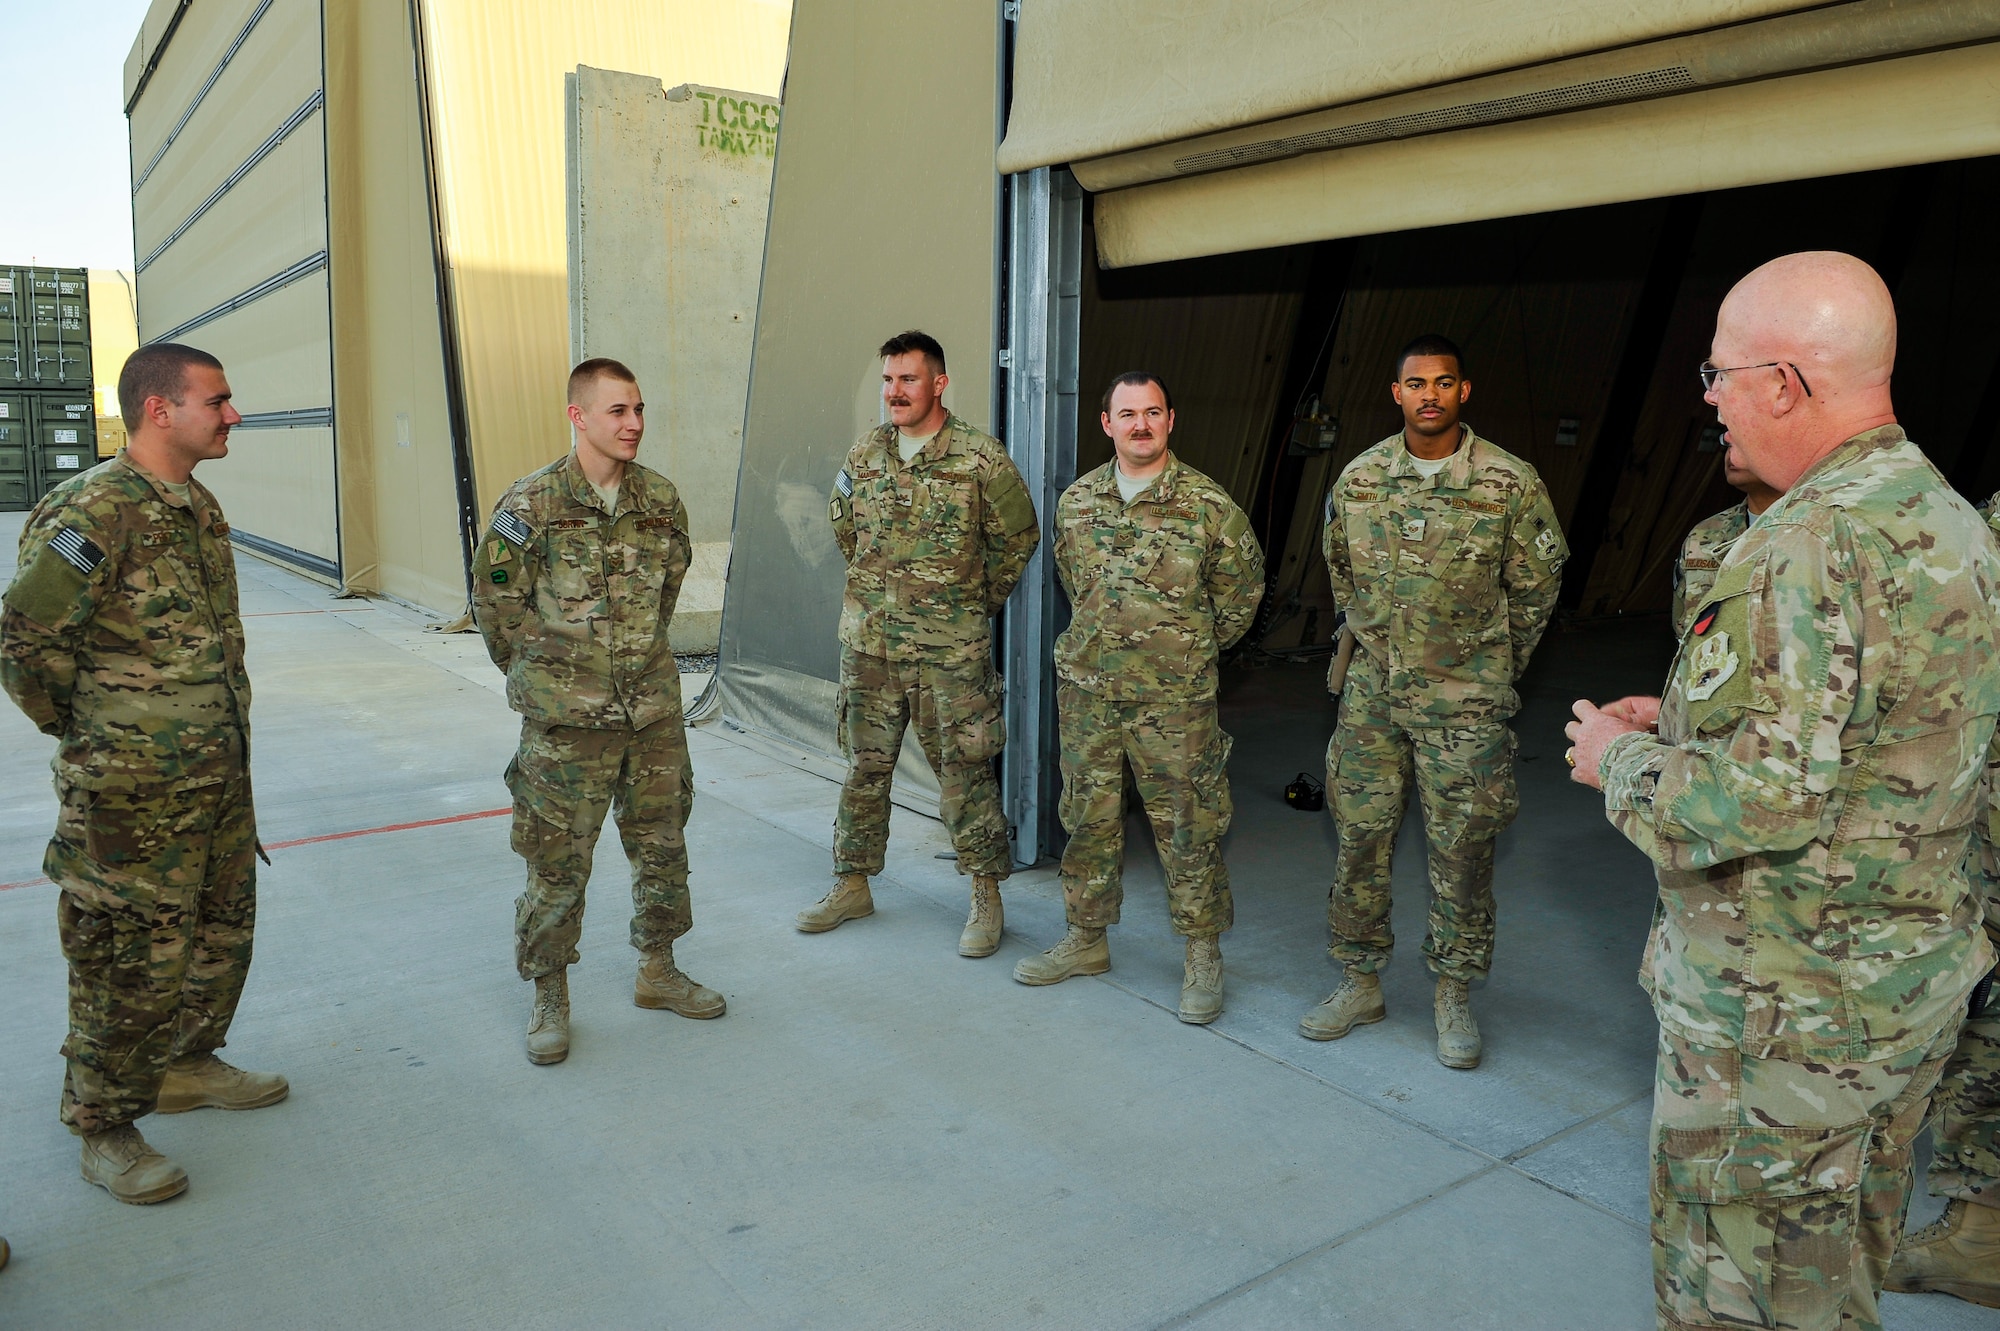 U.S. Air Force Chief Master Sgt. Jeffery Brown, 455th Air Expeditionary Wing command chief, talks with Airmen assigned to the 451st Air Expeditionary Group during a visit to Kandahar Airfield, Afghanistan, May 2, 2015.  The chief along with Brig. Gen. Mark D. Kelly, 455th AEW commander, met with Airmen from across the group who provide intelligence, surveillance and reconnaissance, command and control, personnel recovery, and airborne datalink capabilities to commanders in the Afghanistan theater of operations. (U.S. Air Force photo by Maj. Tony Wickman/Released)    